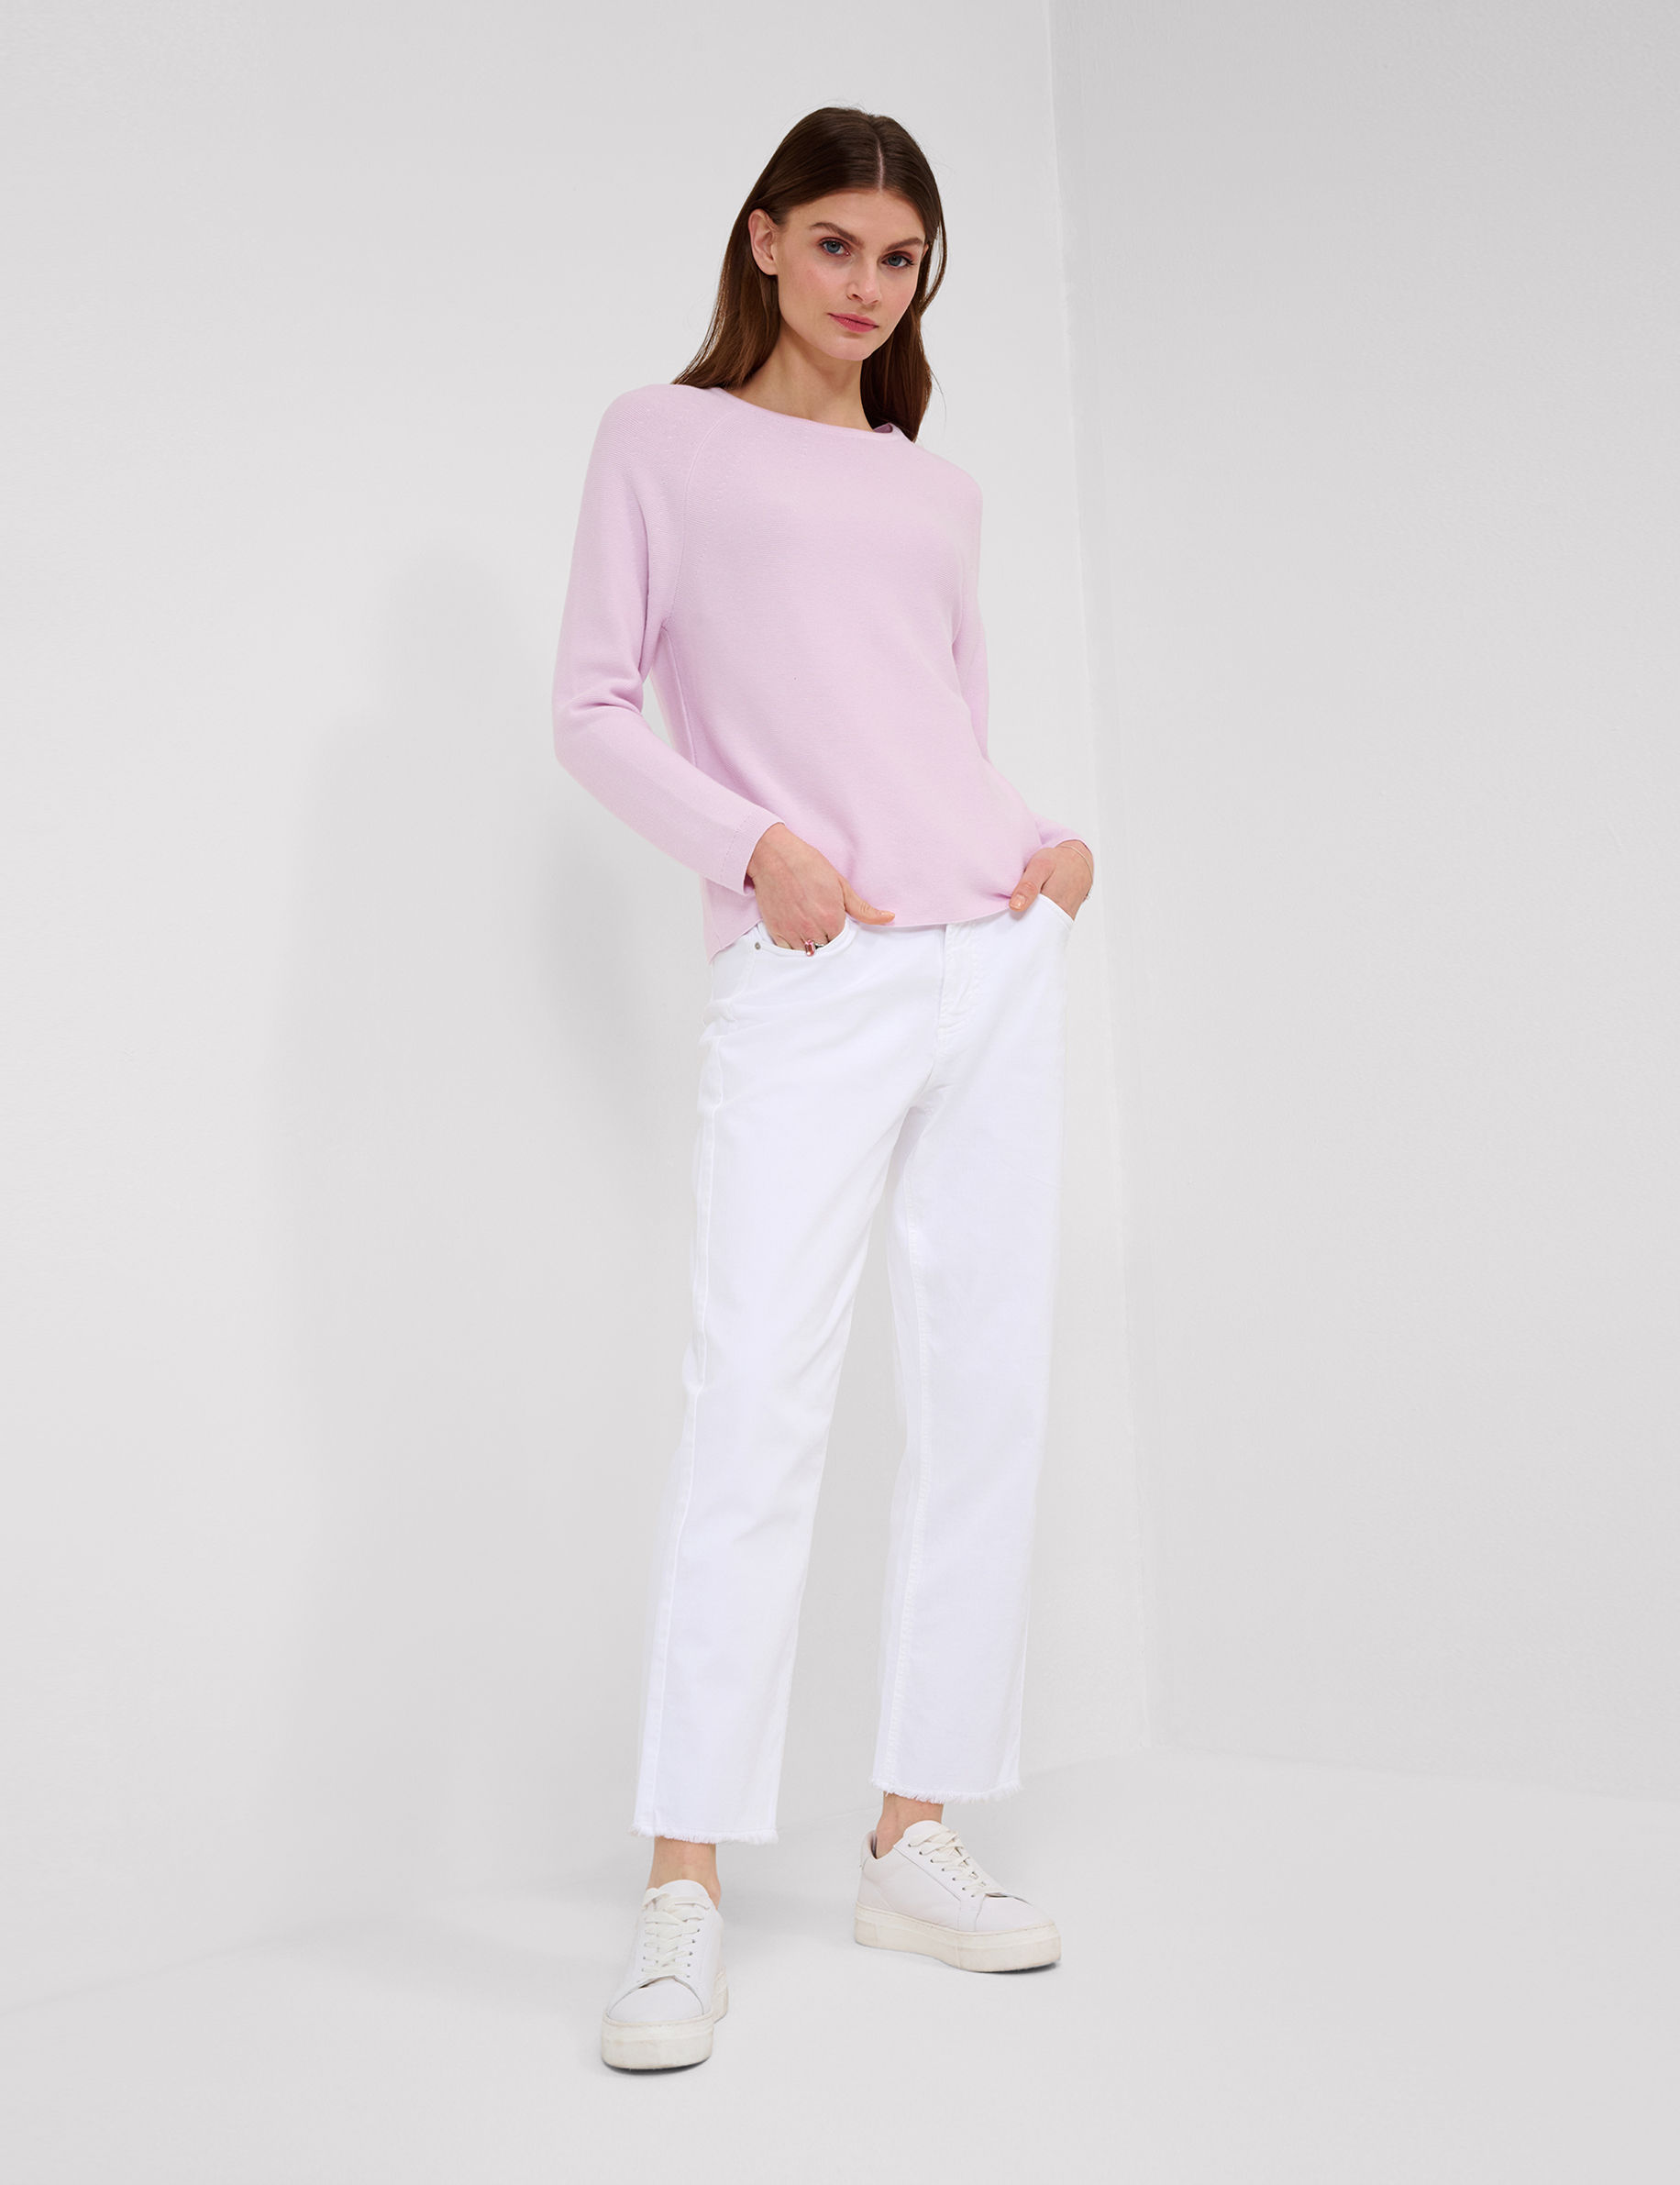 Women Style LESLEY soft purple  Model Outfit